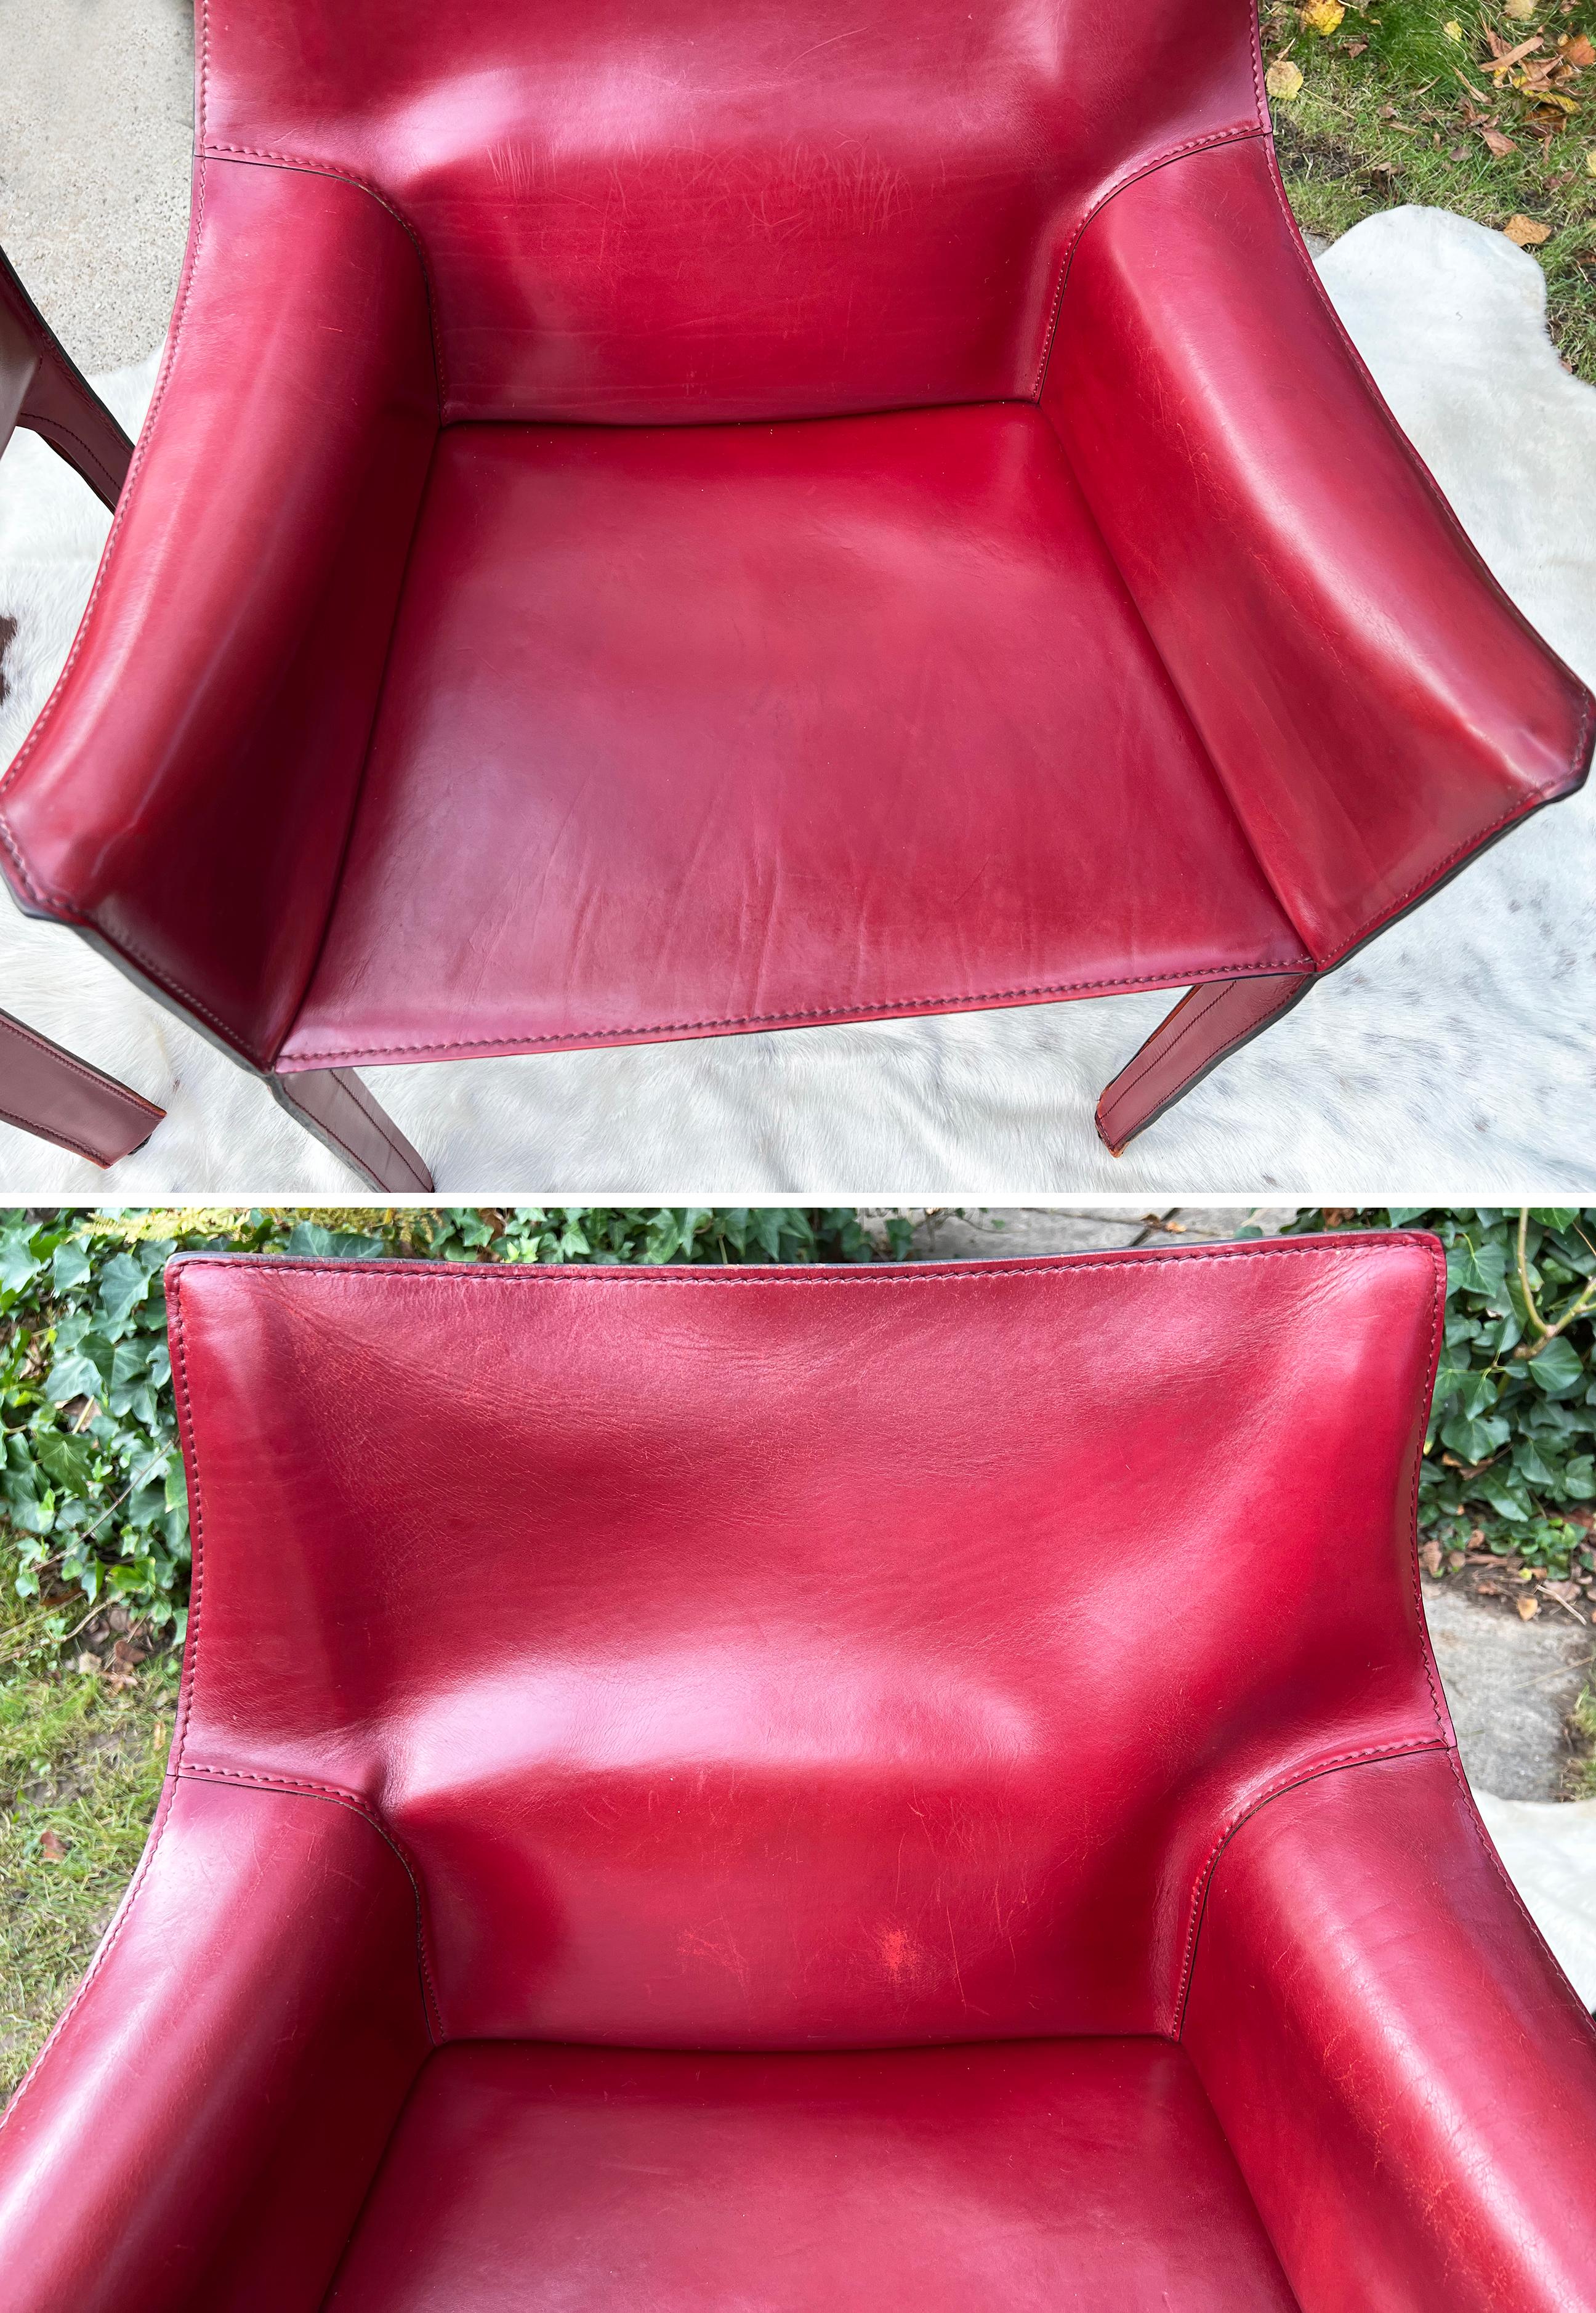 Post-Modern Cassina Cab 414 Armchairs PAIR by Mario Bellini in Gorgeous Oxblood Red Leather For Sale